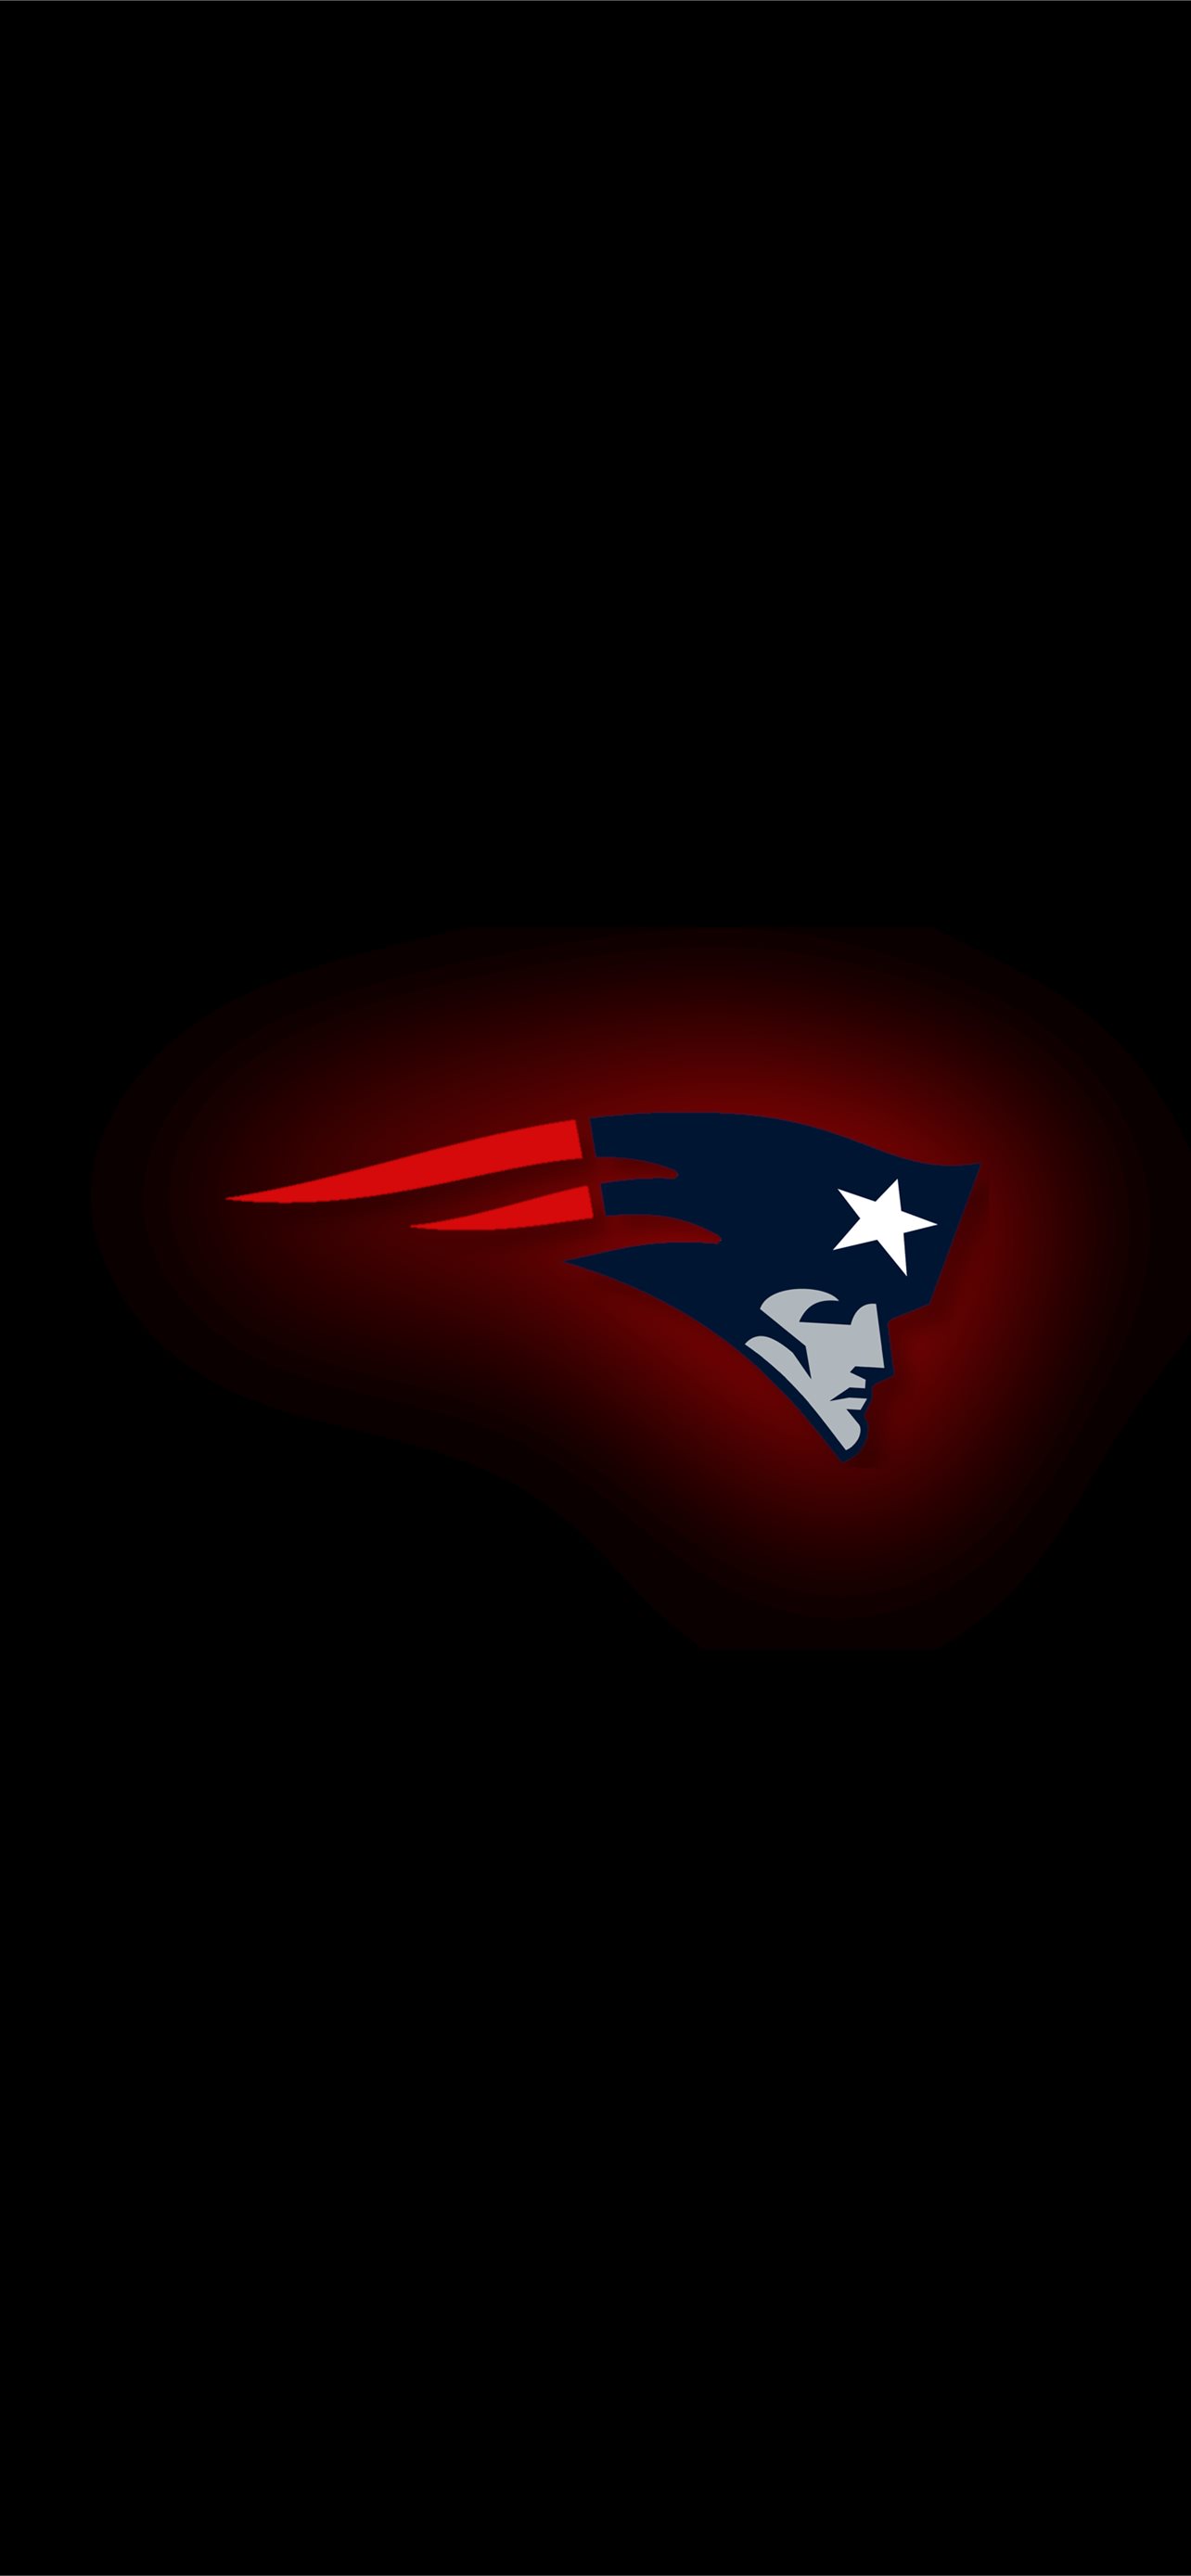 2023 New England Patriots wallpaper – Pro Sports Backgrounds